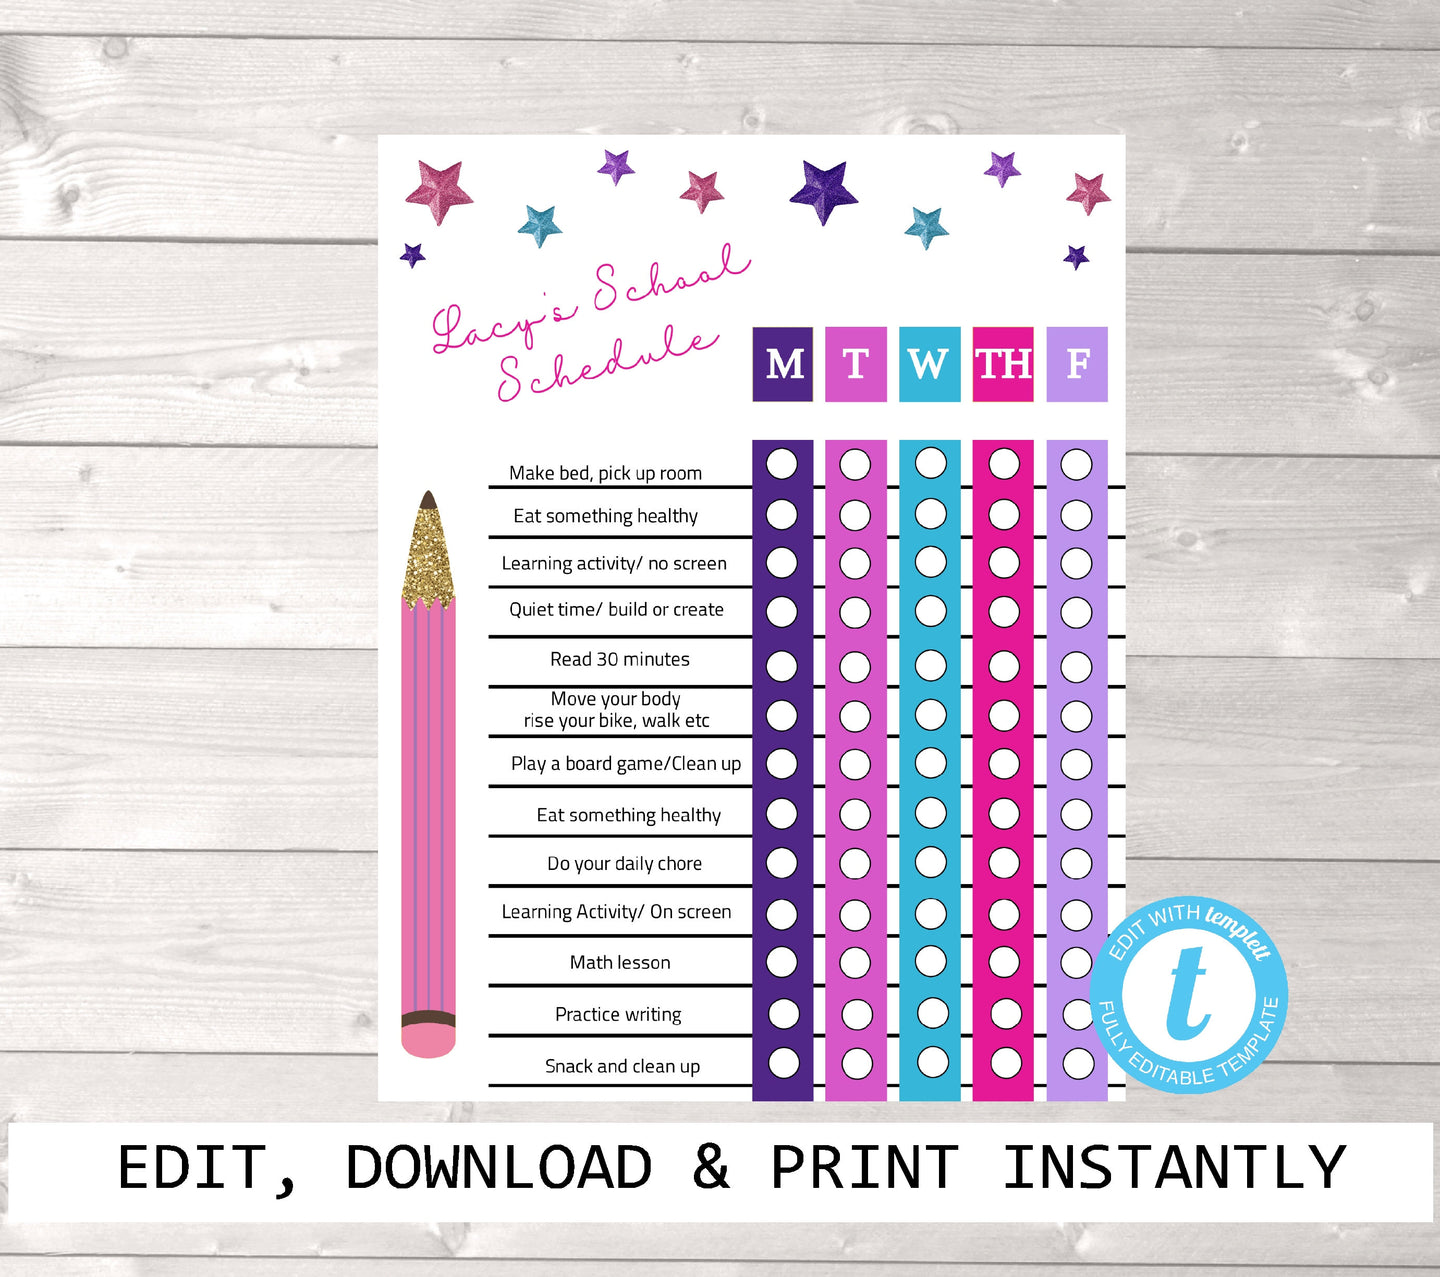 Homechool schedule, Back to school, Distance Learning Chart, Family Schedule, Glitter Daily Planner, Kids Routine Checklist, Timeline, Chore